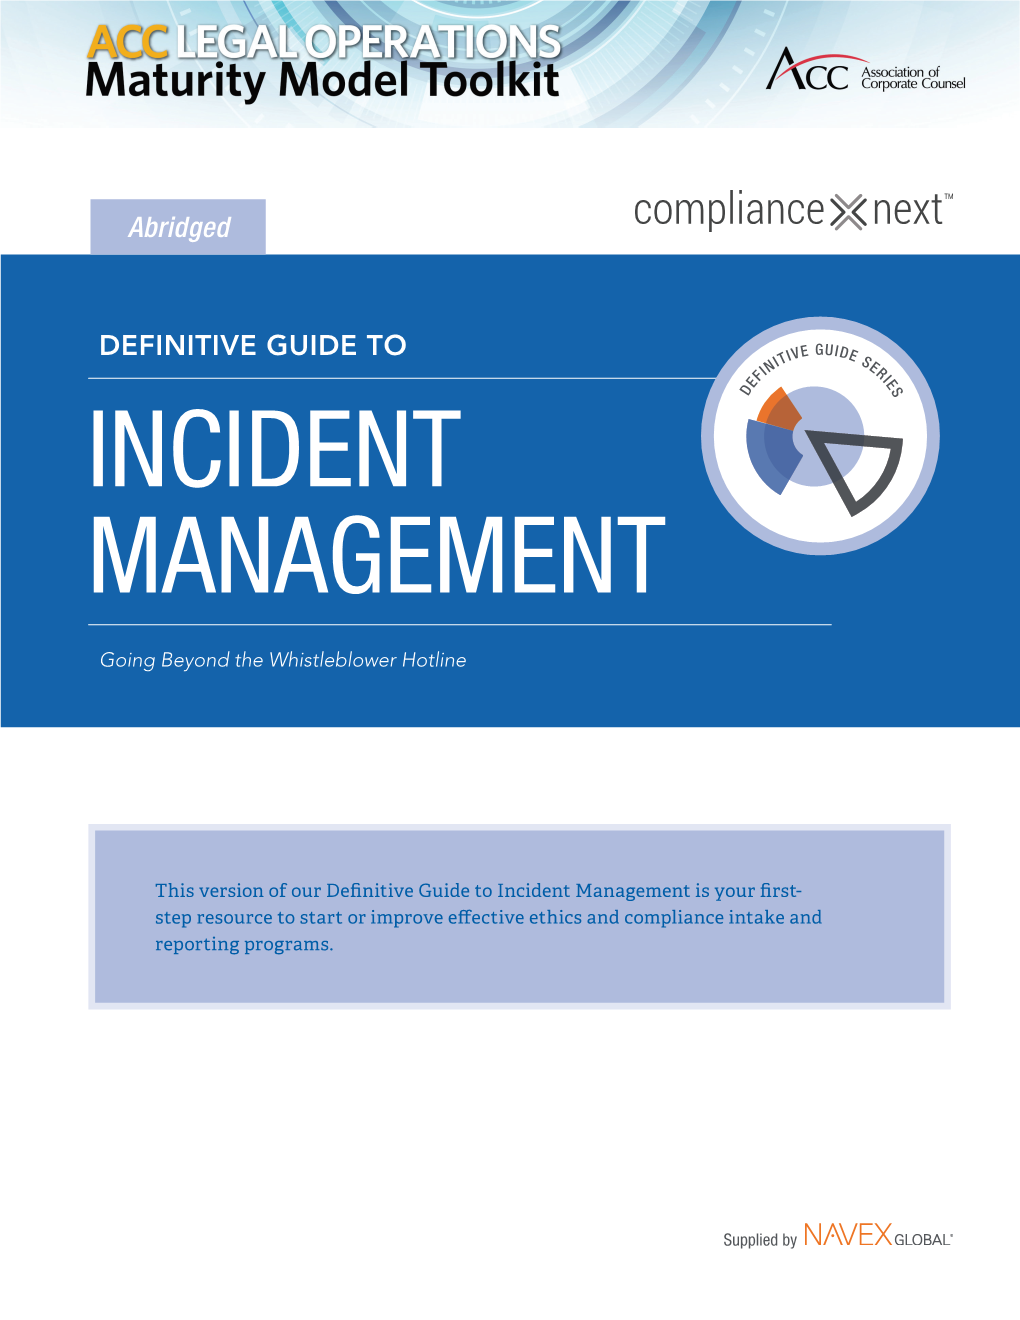 Incident Management Is Your First- Step Resource to Start Or Improve Effective Ethics and Compliance Intake and Reporting Programs